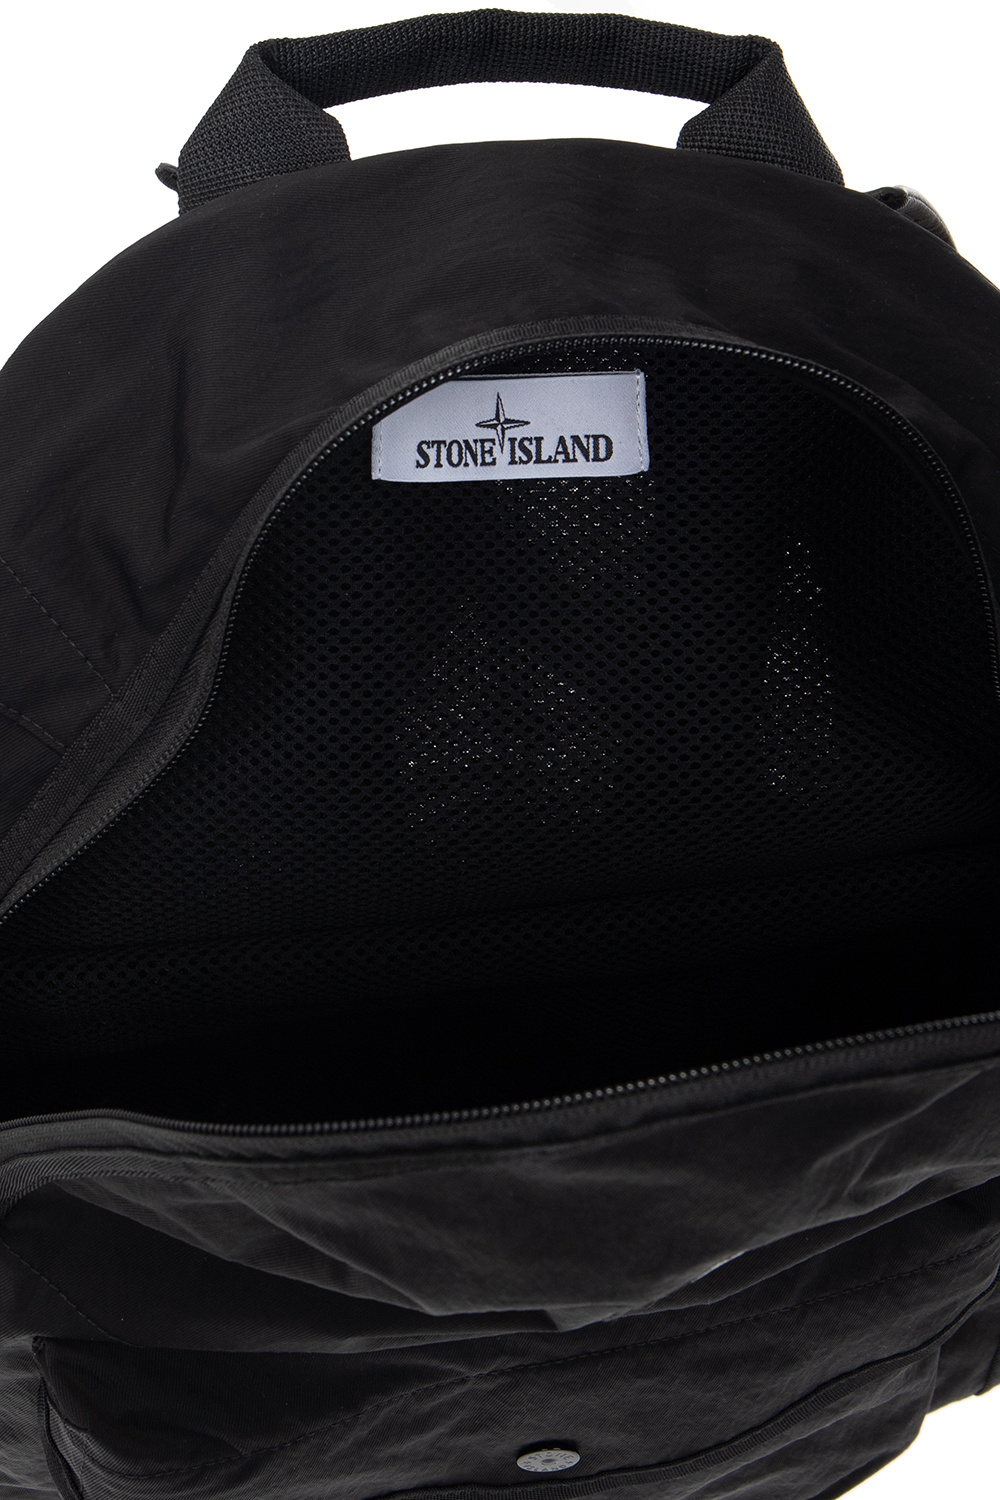 Stone Island Backpack with logo | Men's Bags | Vitkac